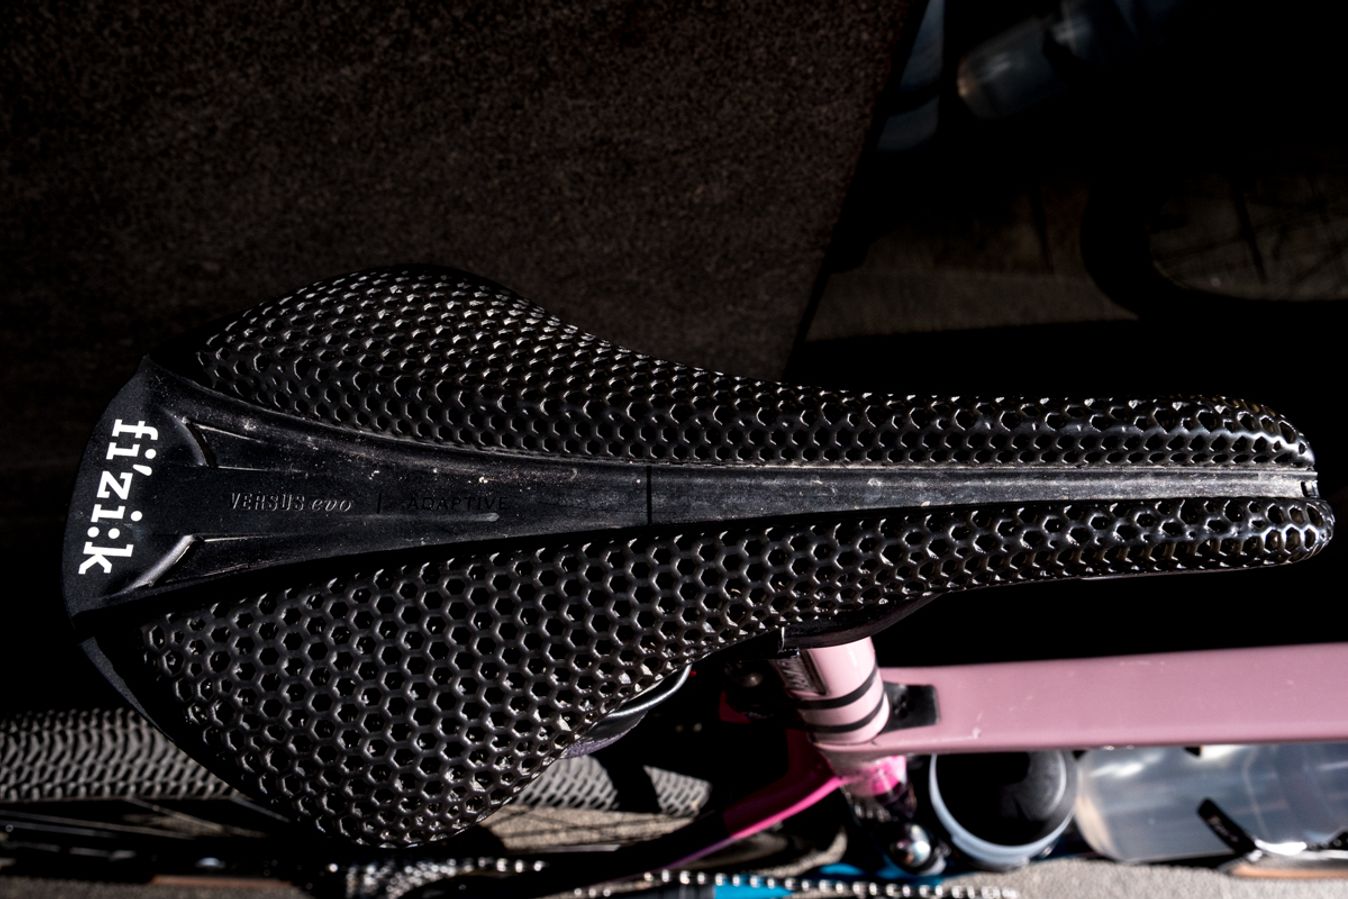 3D-printed saddles are now common and used by many pros